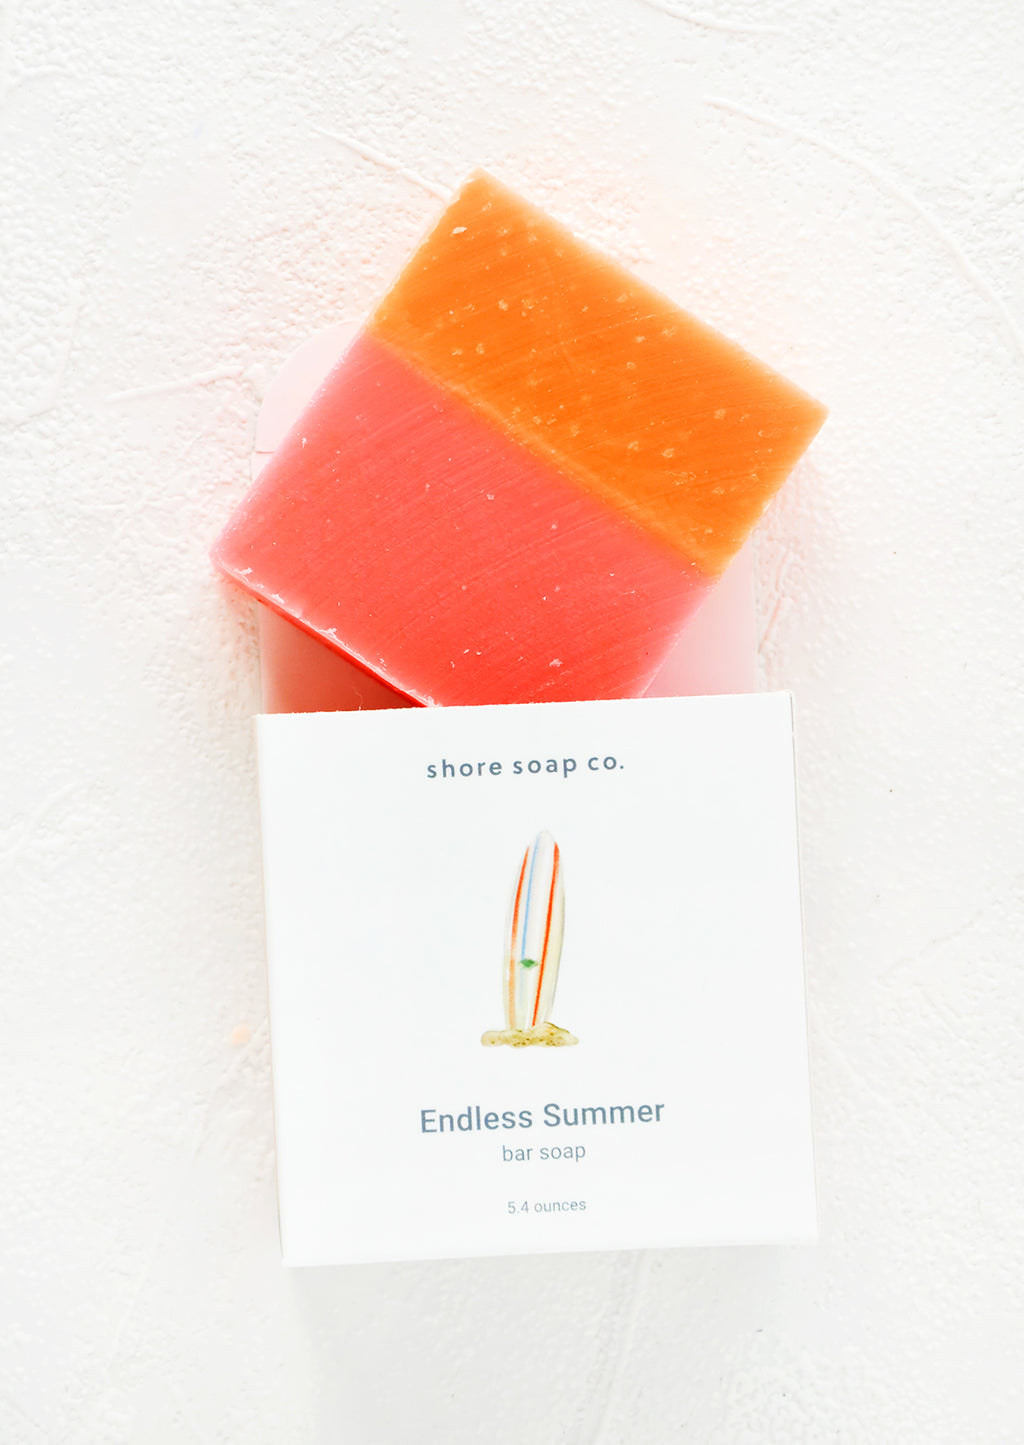 Endless Summer: Square bar soap in pink & orange emerging from nautical themed packaging